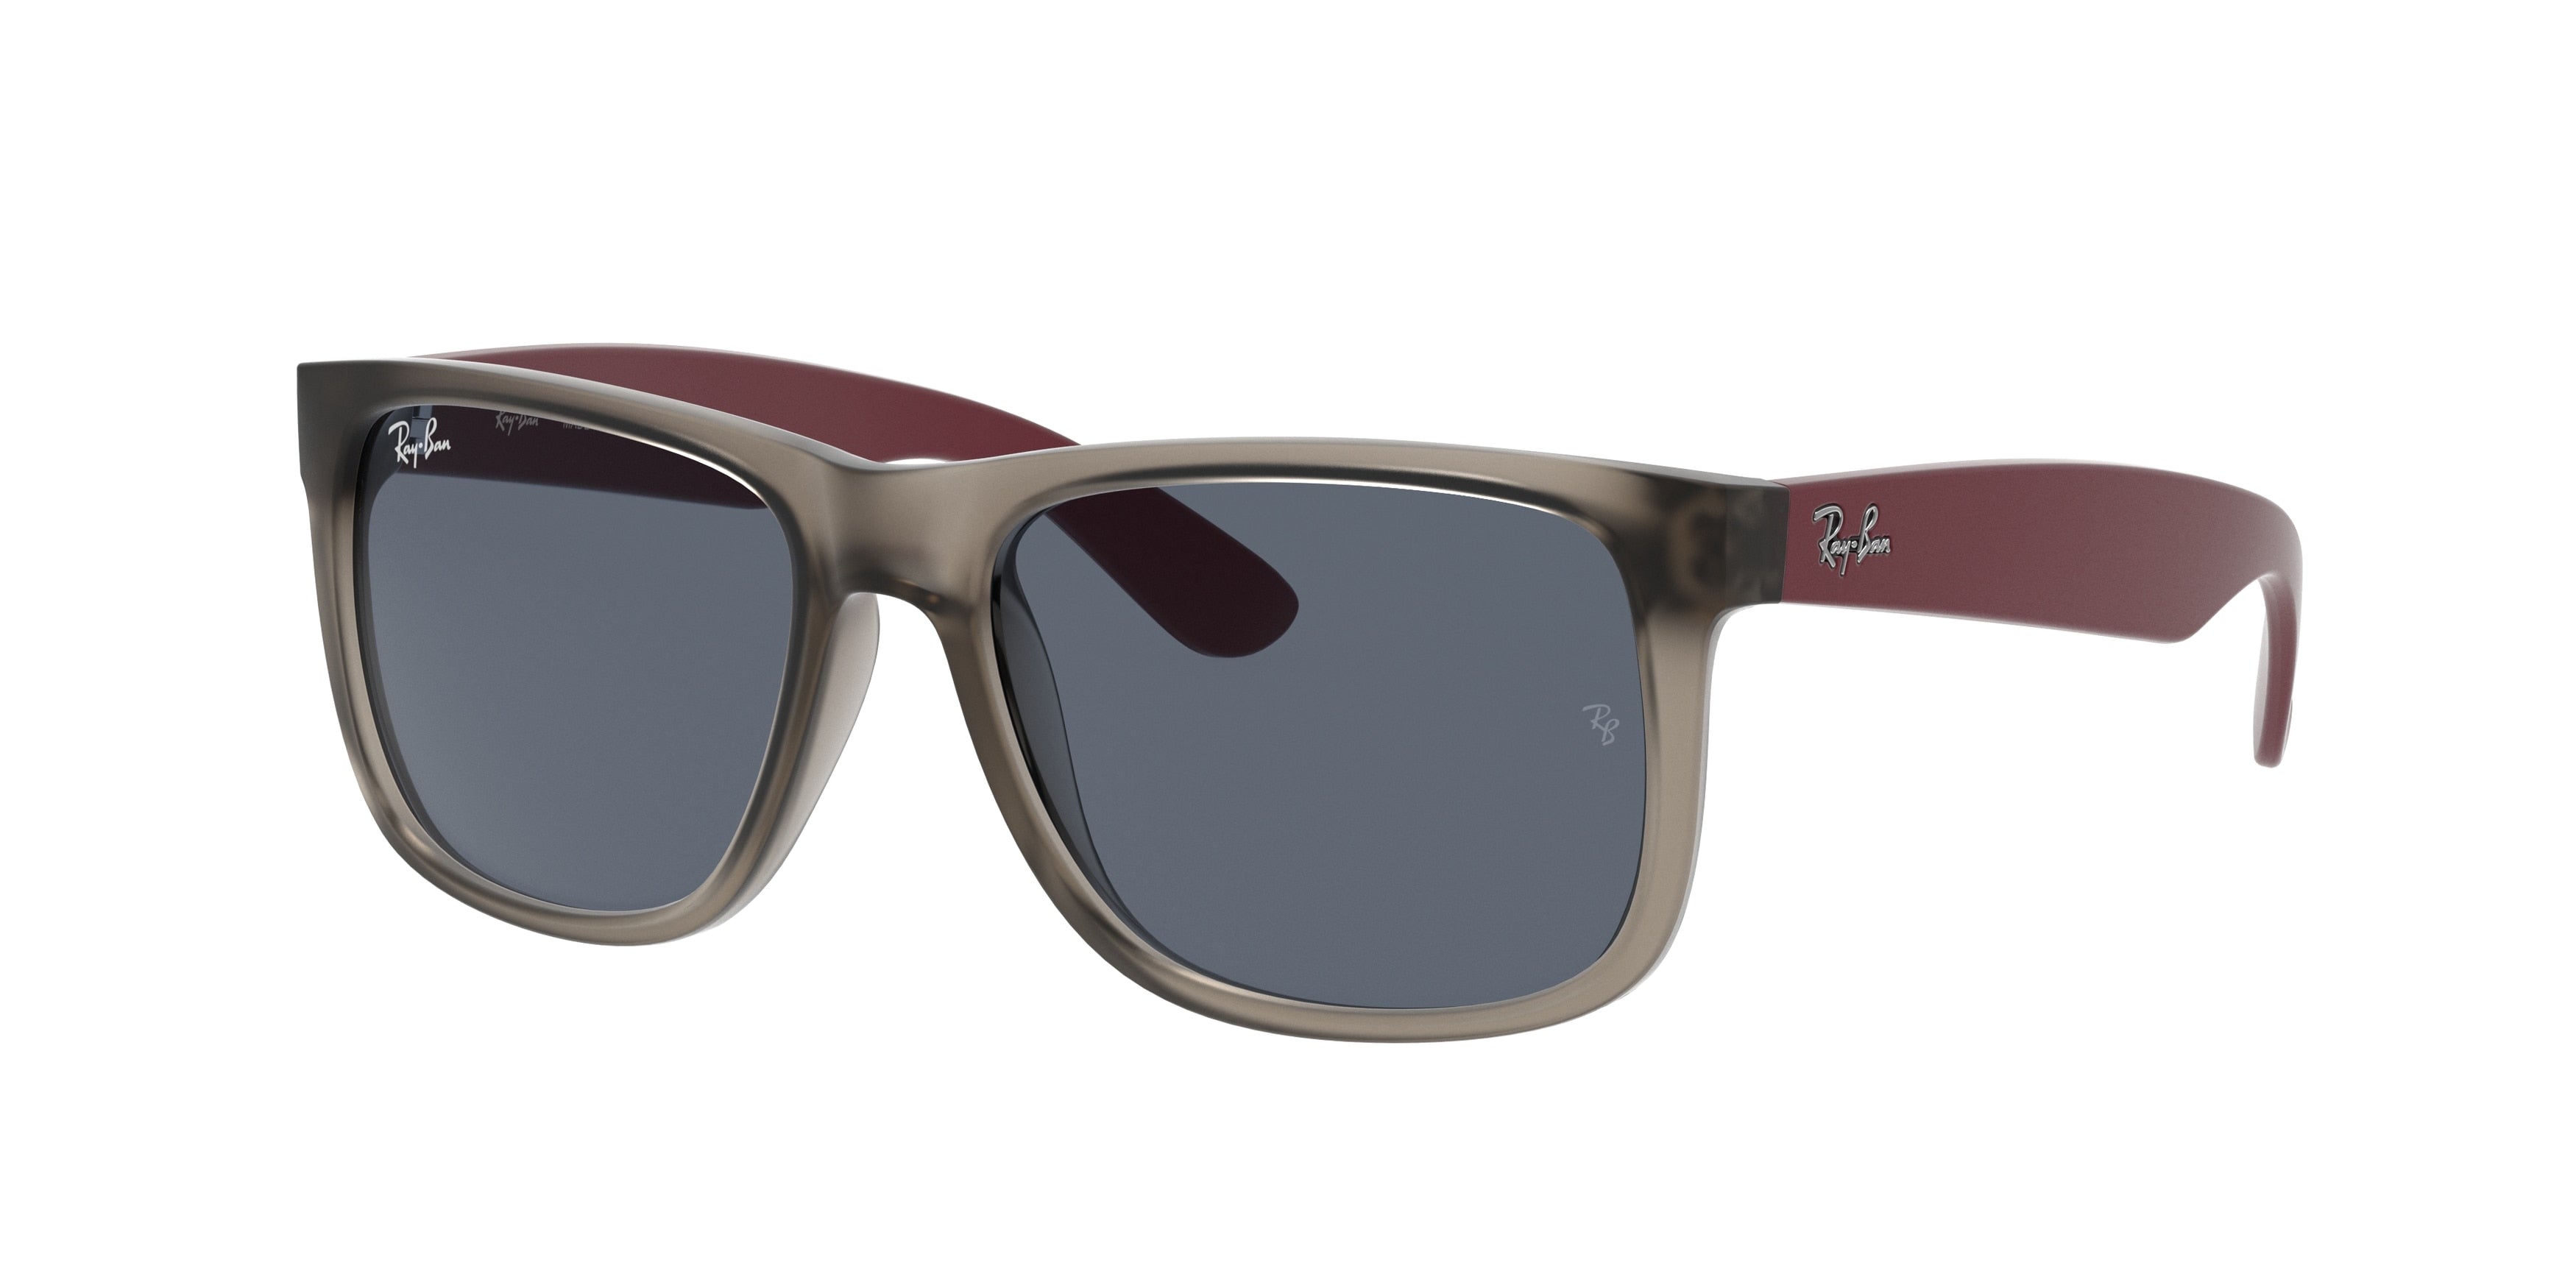 Ray-Ban JUSTIN RB4165 Square Sunglasses  650987-Transparent Grey 50-145-16 - Color Map Grey